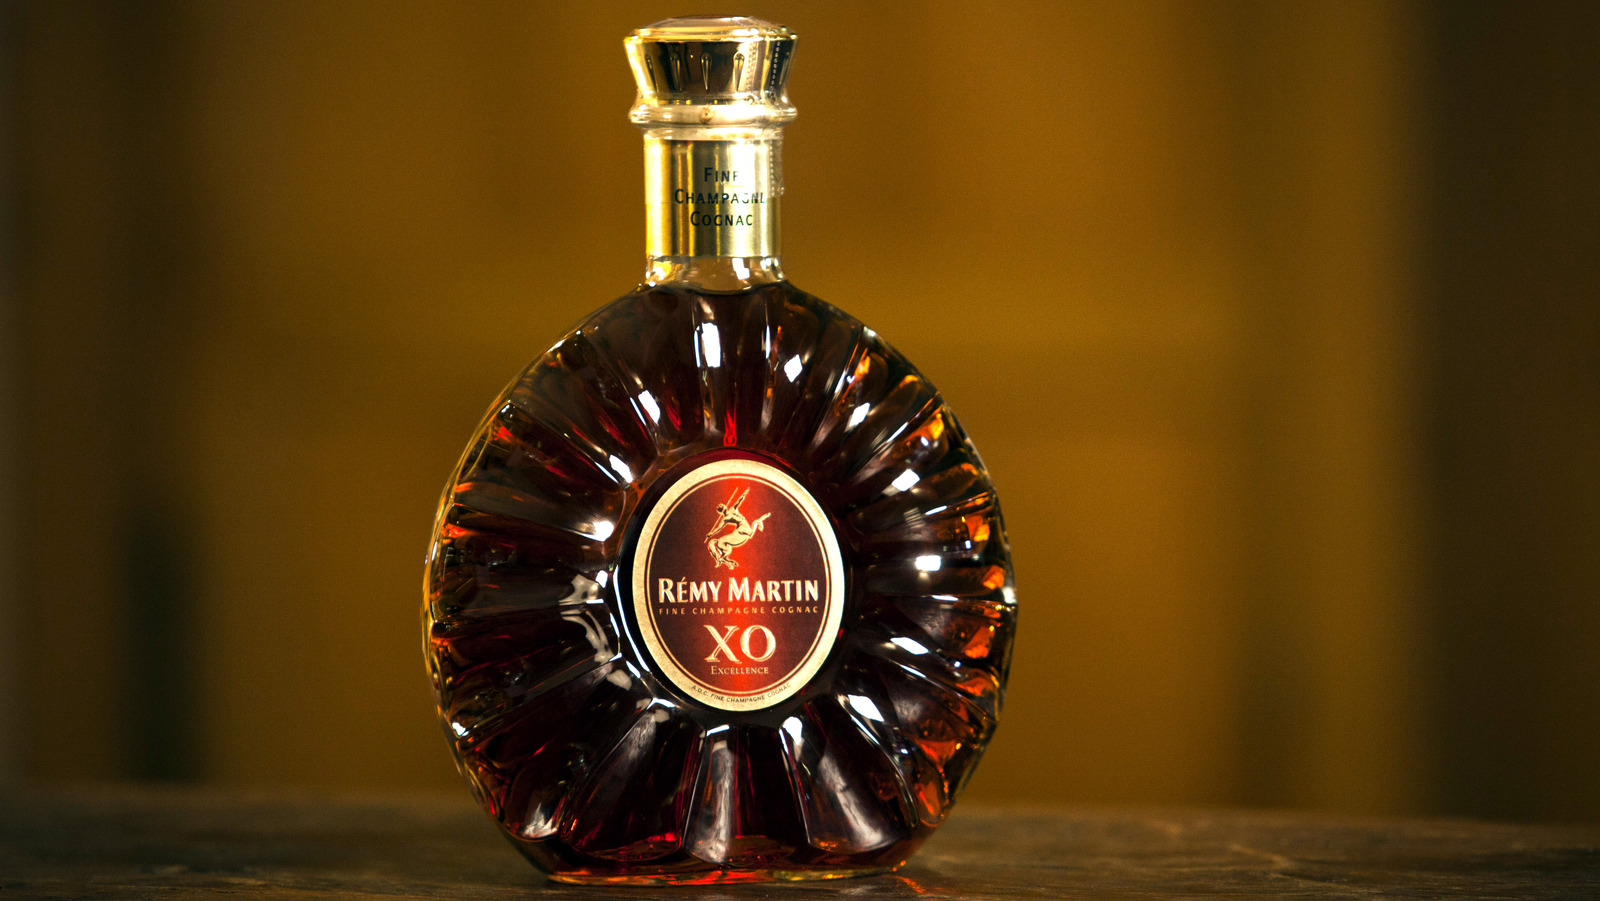 Introduction to the Remy Martin Louis XIII cognac: Cellar visit and tasting